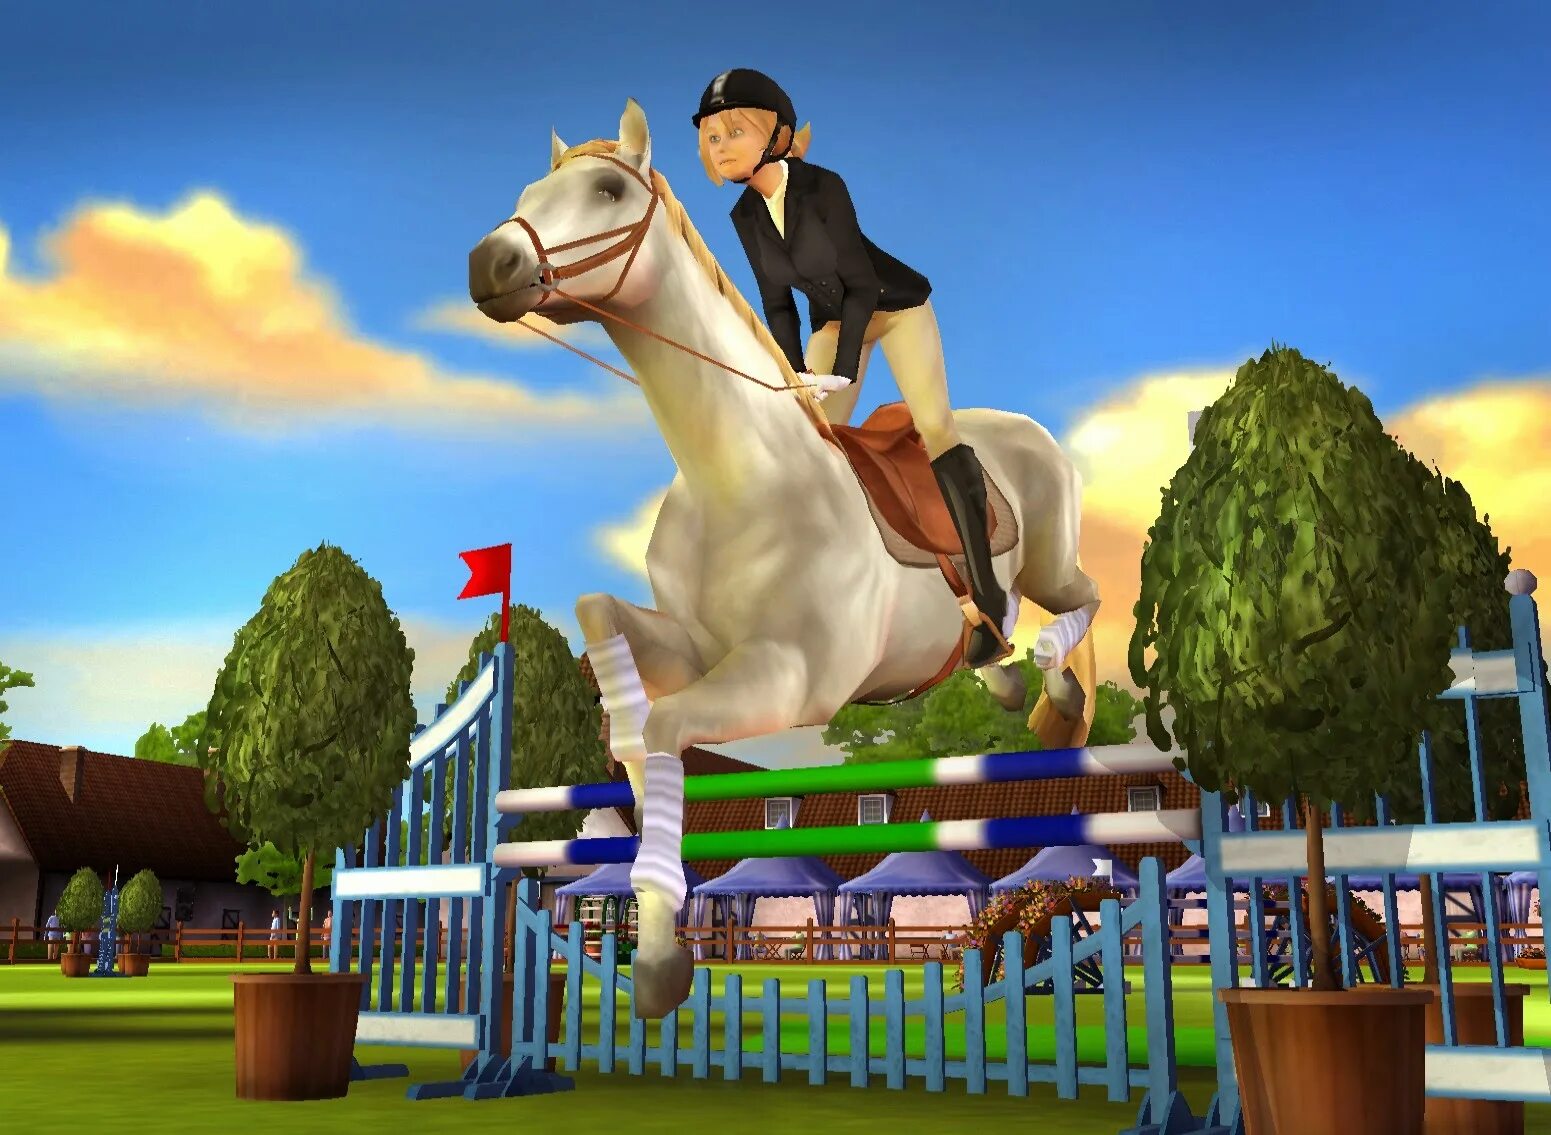 Игра my Horse and me 2. My Horse and me 2 на Xbox 360. Игра my Horse and me 3. Игры про лошадей my Horse and me.